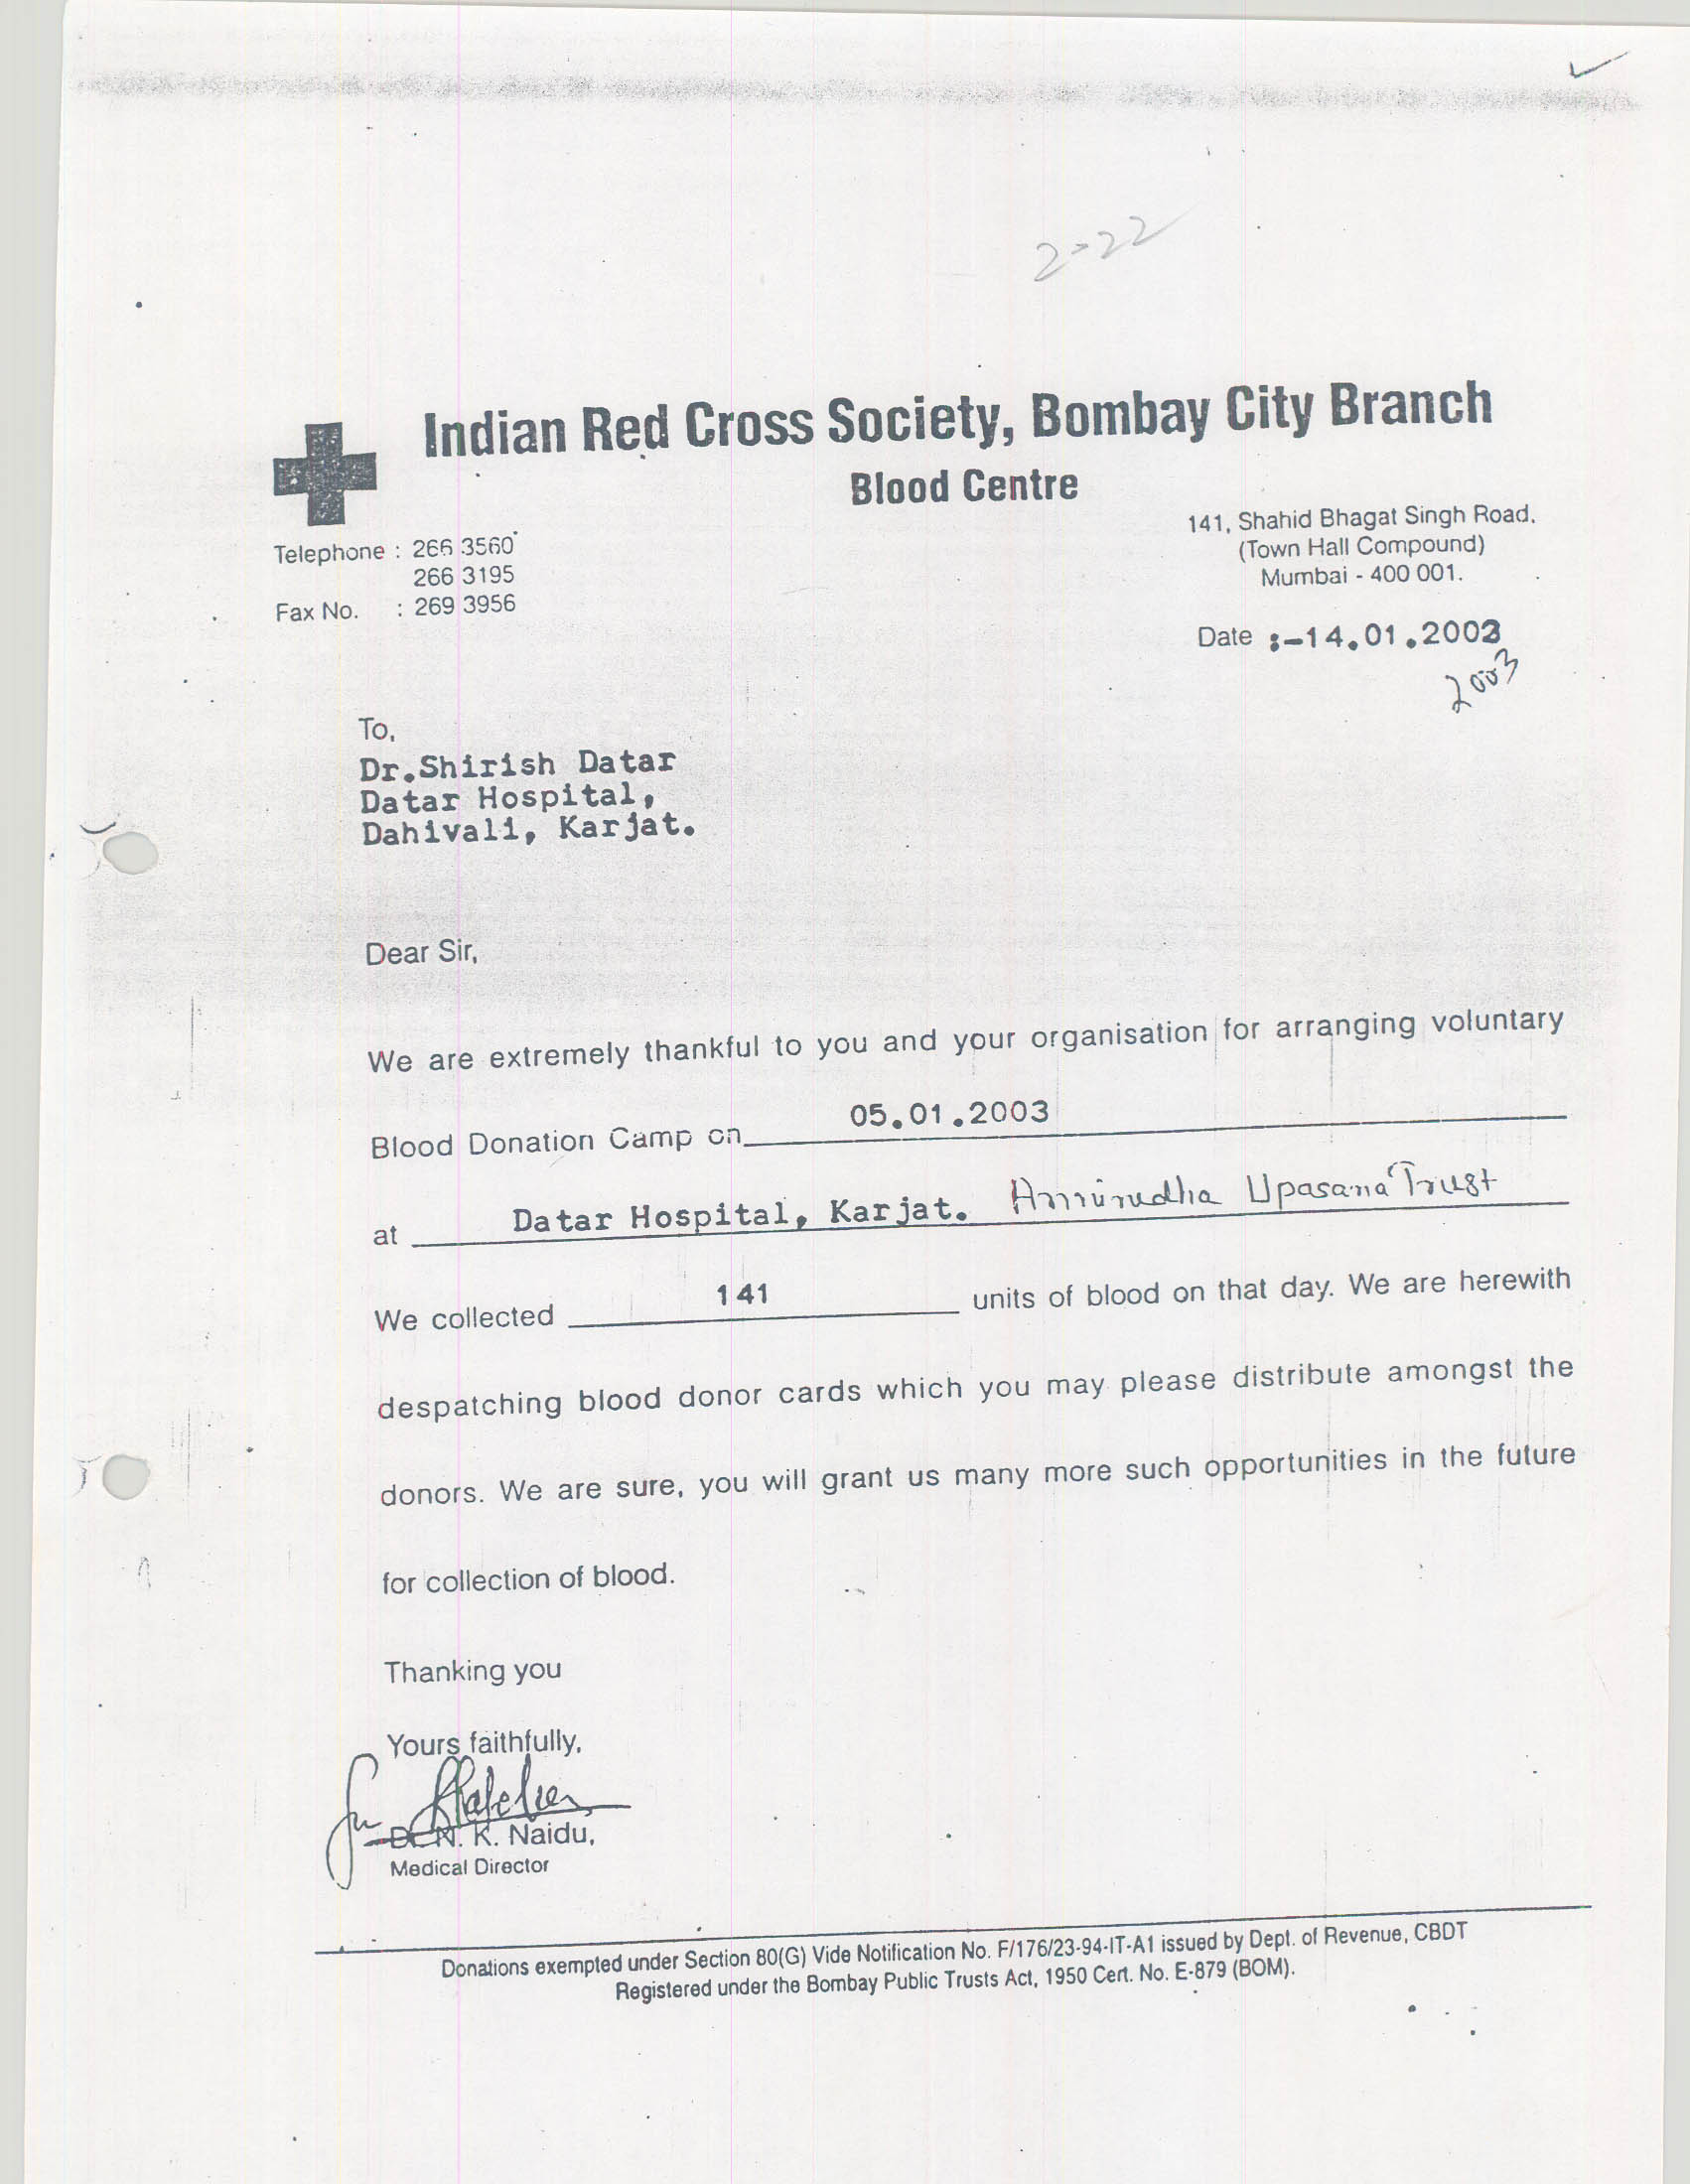 Appreciation-Letter from Indian Red Cross Society1 2003-for-Aniruddhafoundation-Compassion-Social-services